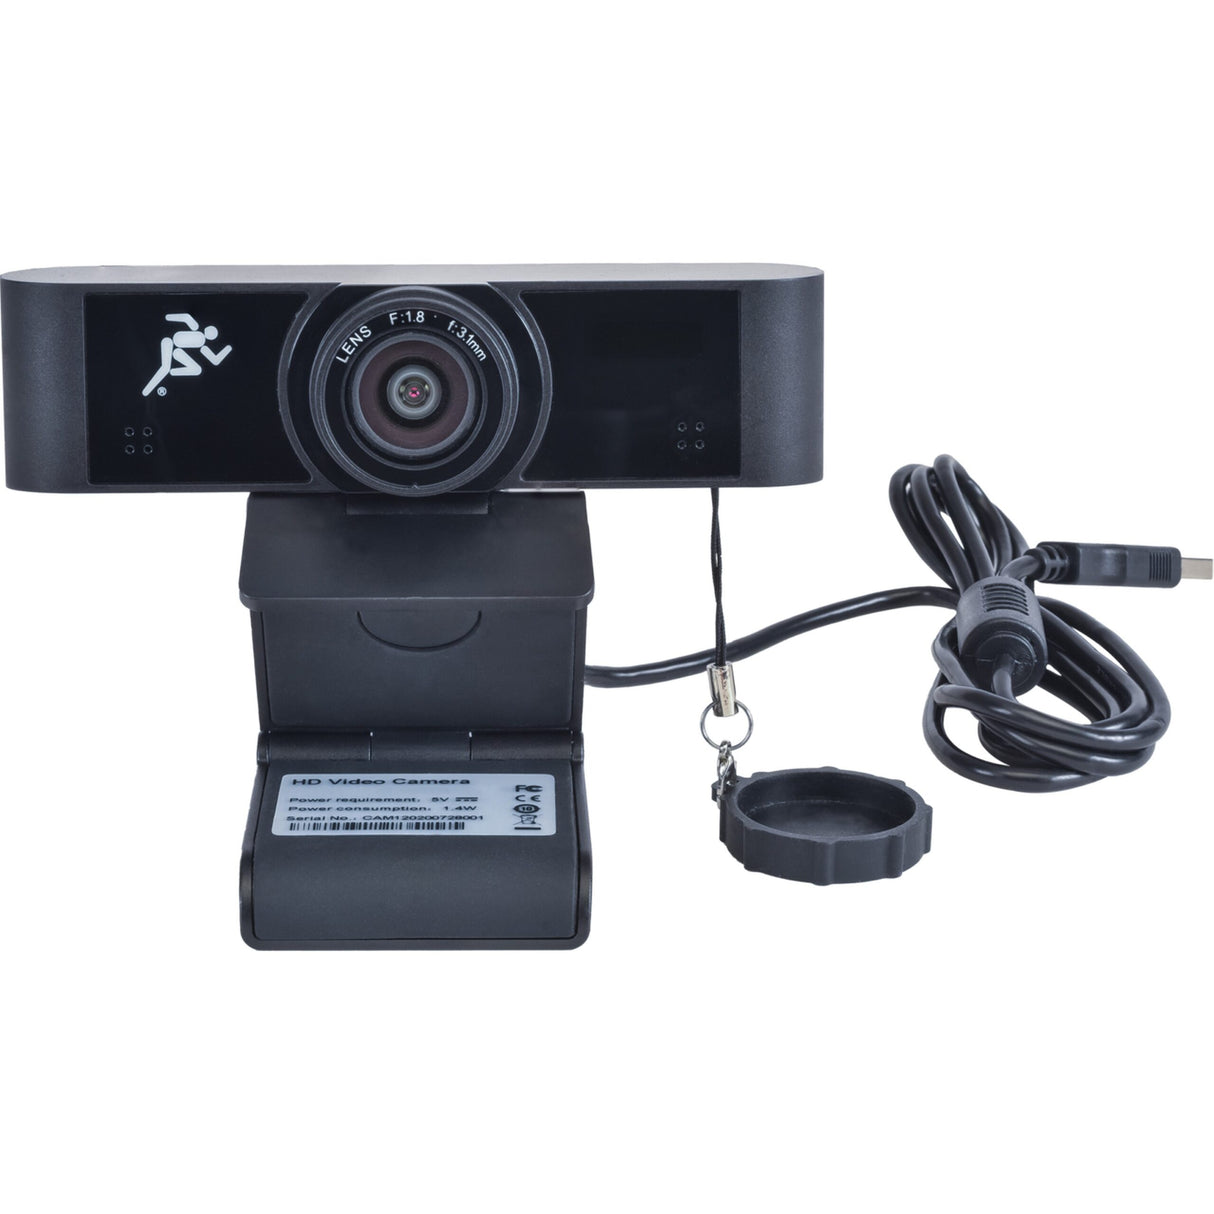 DigitaLinx USB 1080p WebCam with 90 Degree Field of View